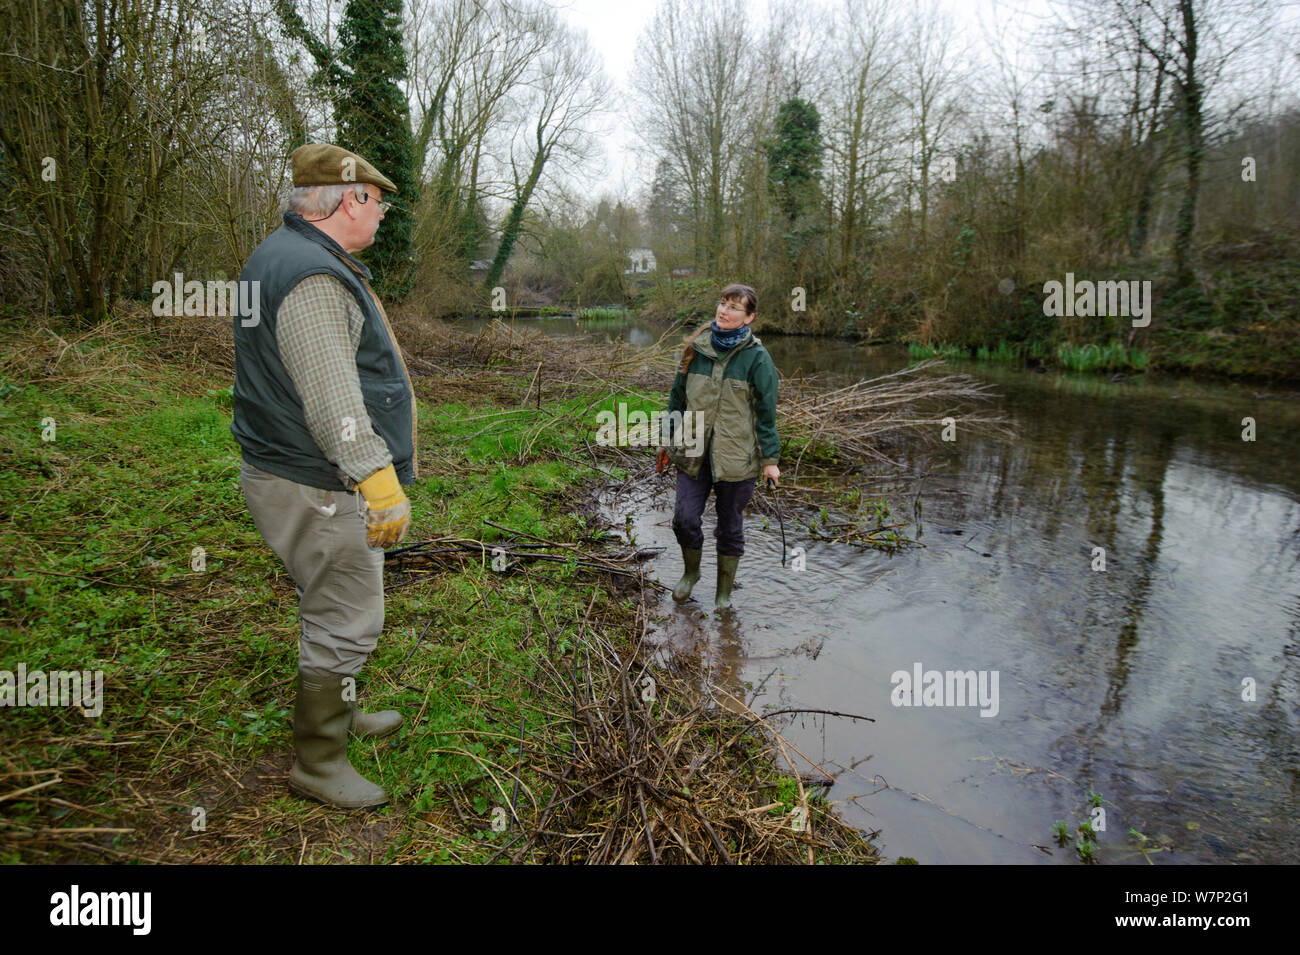 A member of staff from the Wildwood Trust, talks to landowner, during conservation efforts to improve water vole habitat on a stream by cutting trees to allow growth of bankside vegetation, East Malling, Kent England, February 2011 Stock Photo